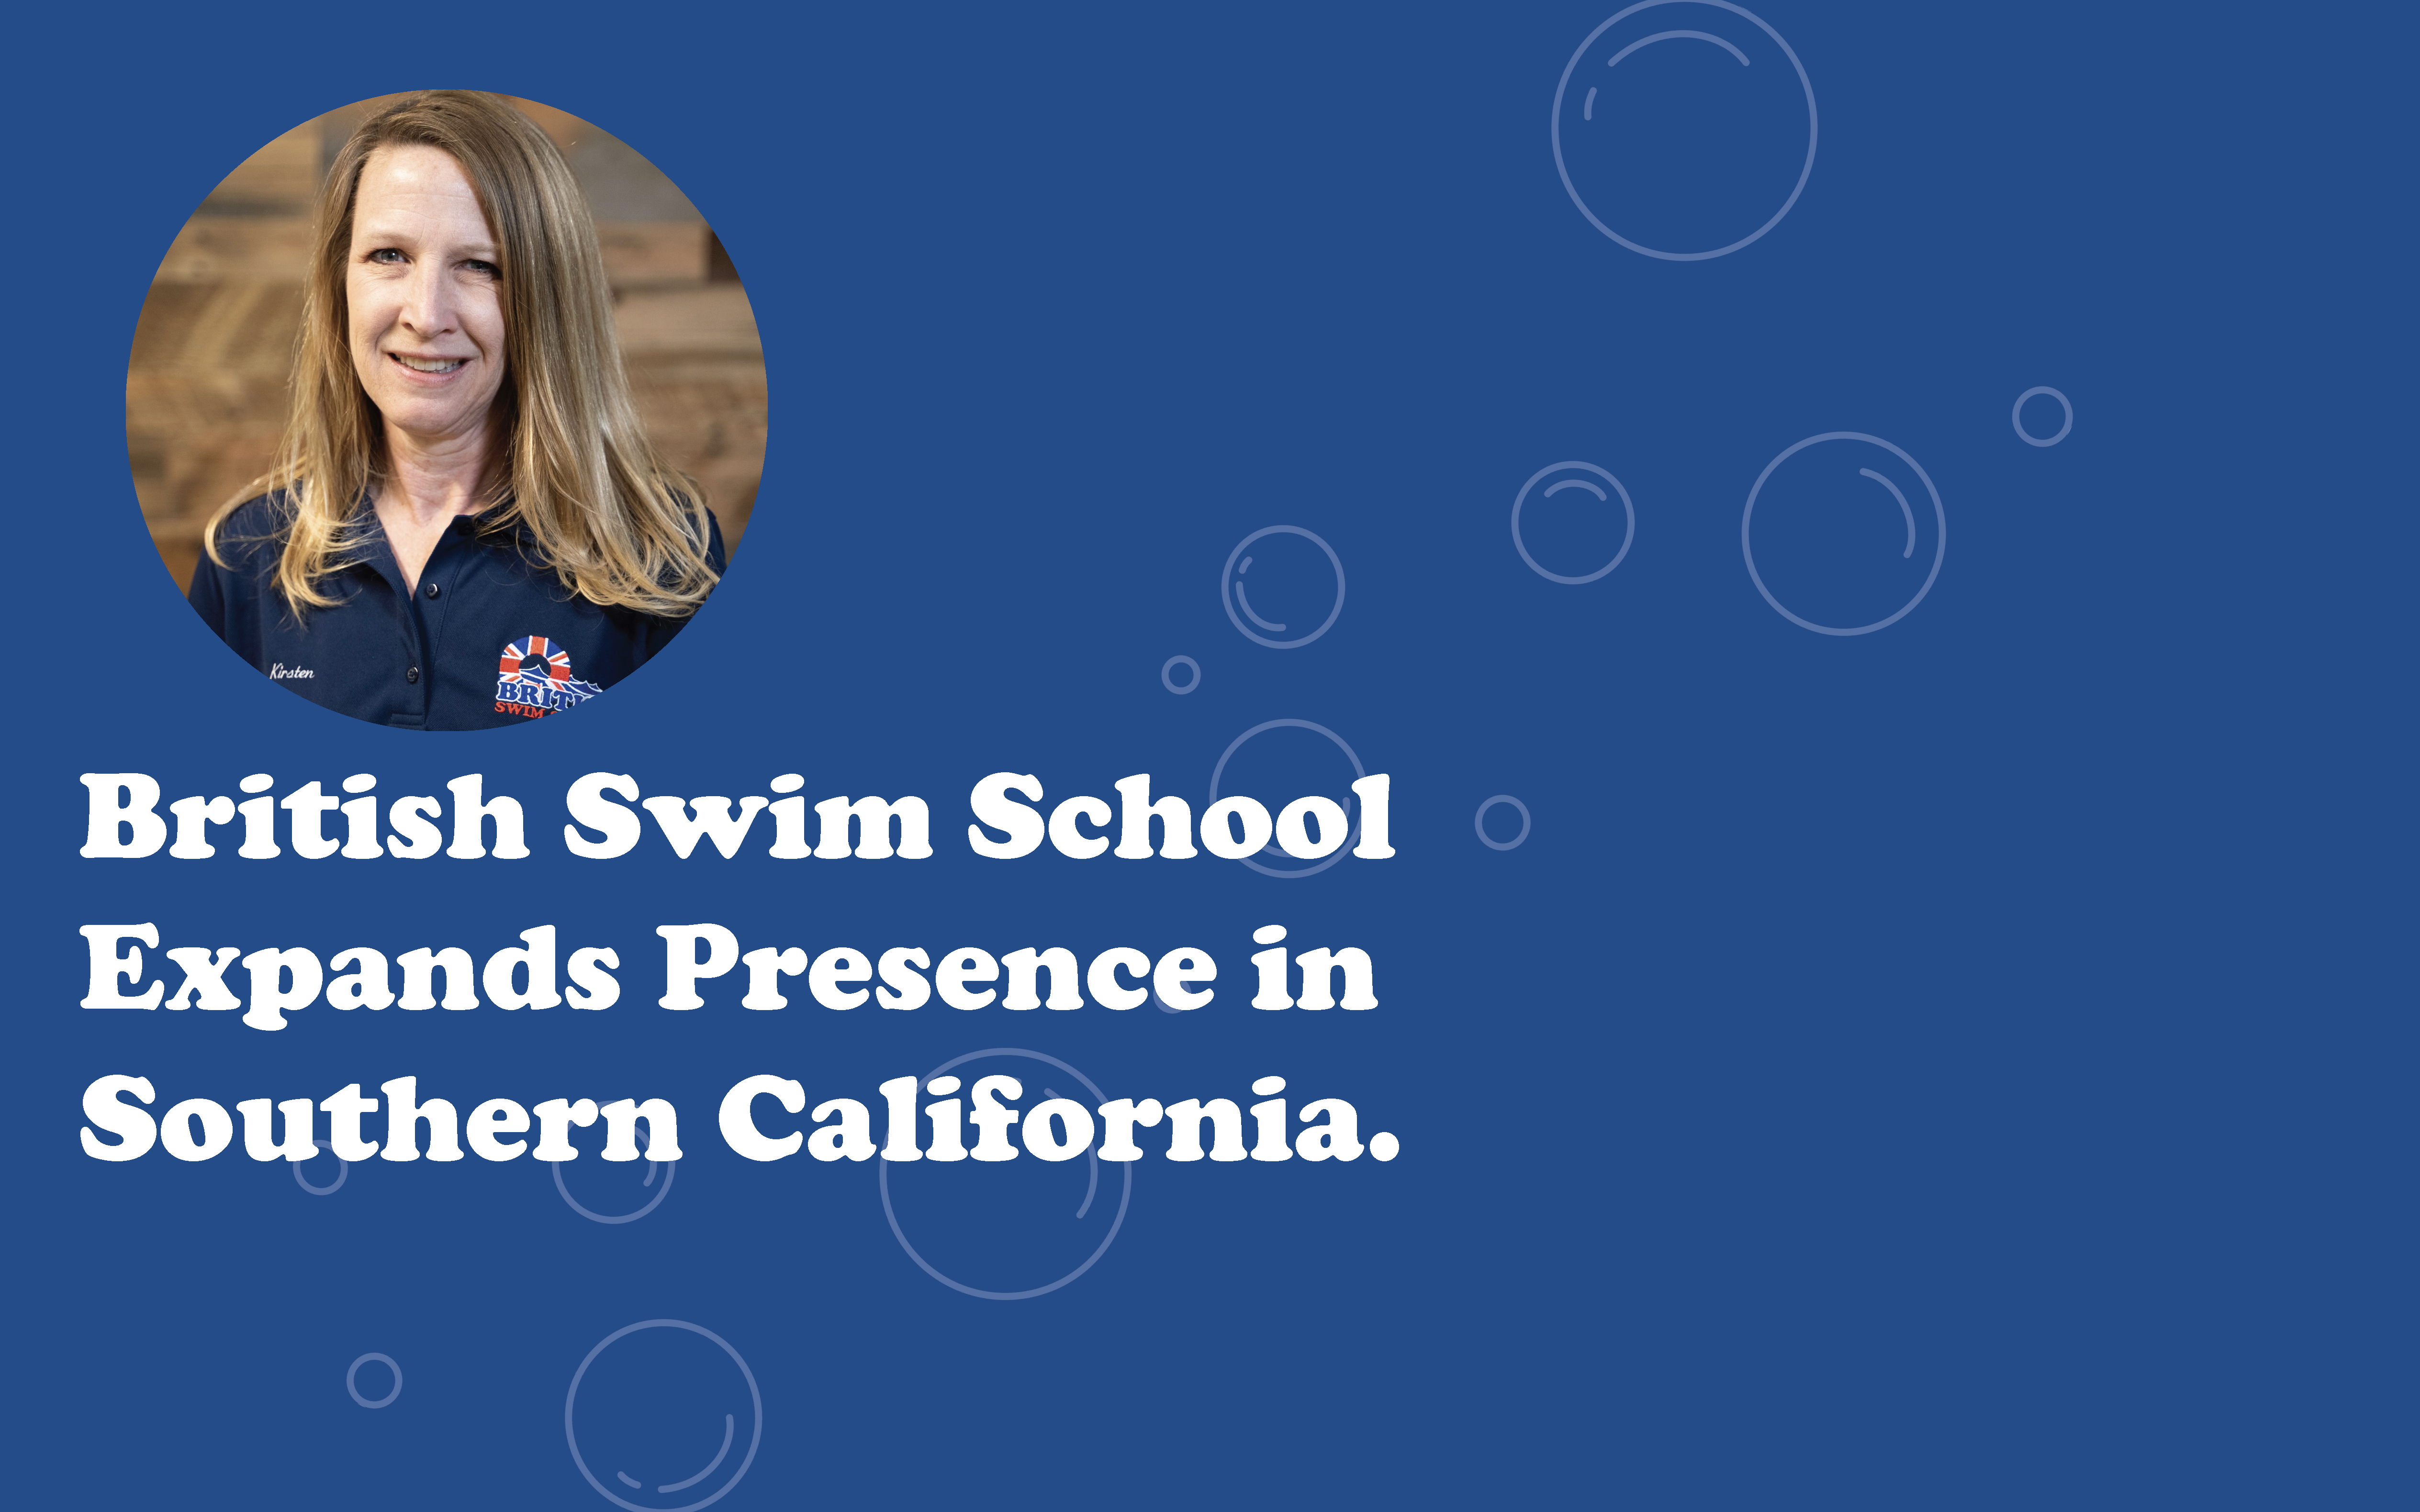 Image of British Swim School Expands Presence in Southern California